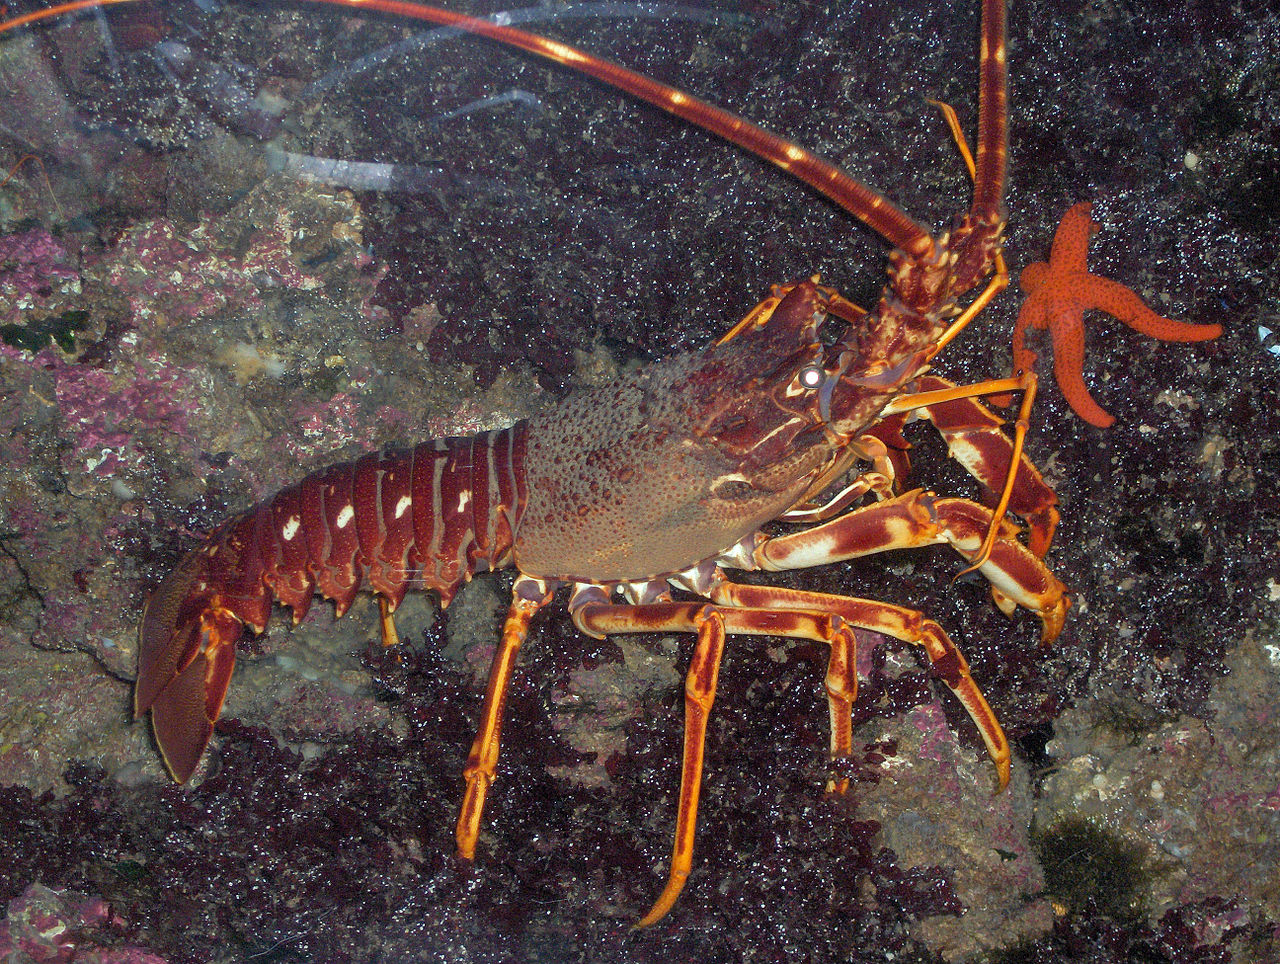 Rockin&amp;#39; lobsters - you might hear these spiny critters from 3 kms away ...